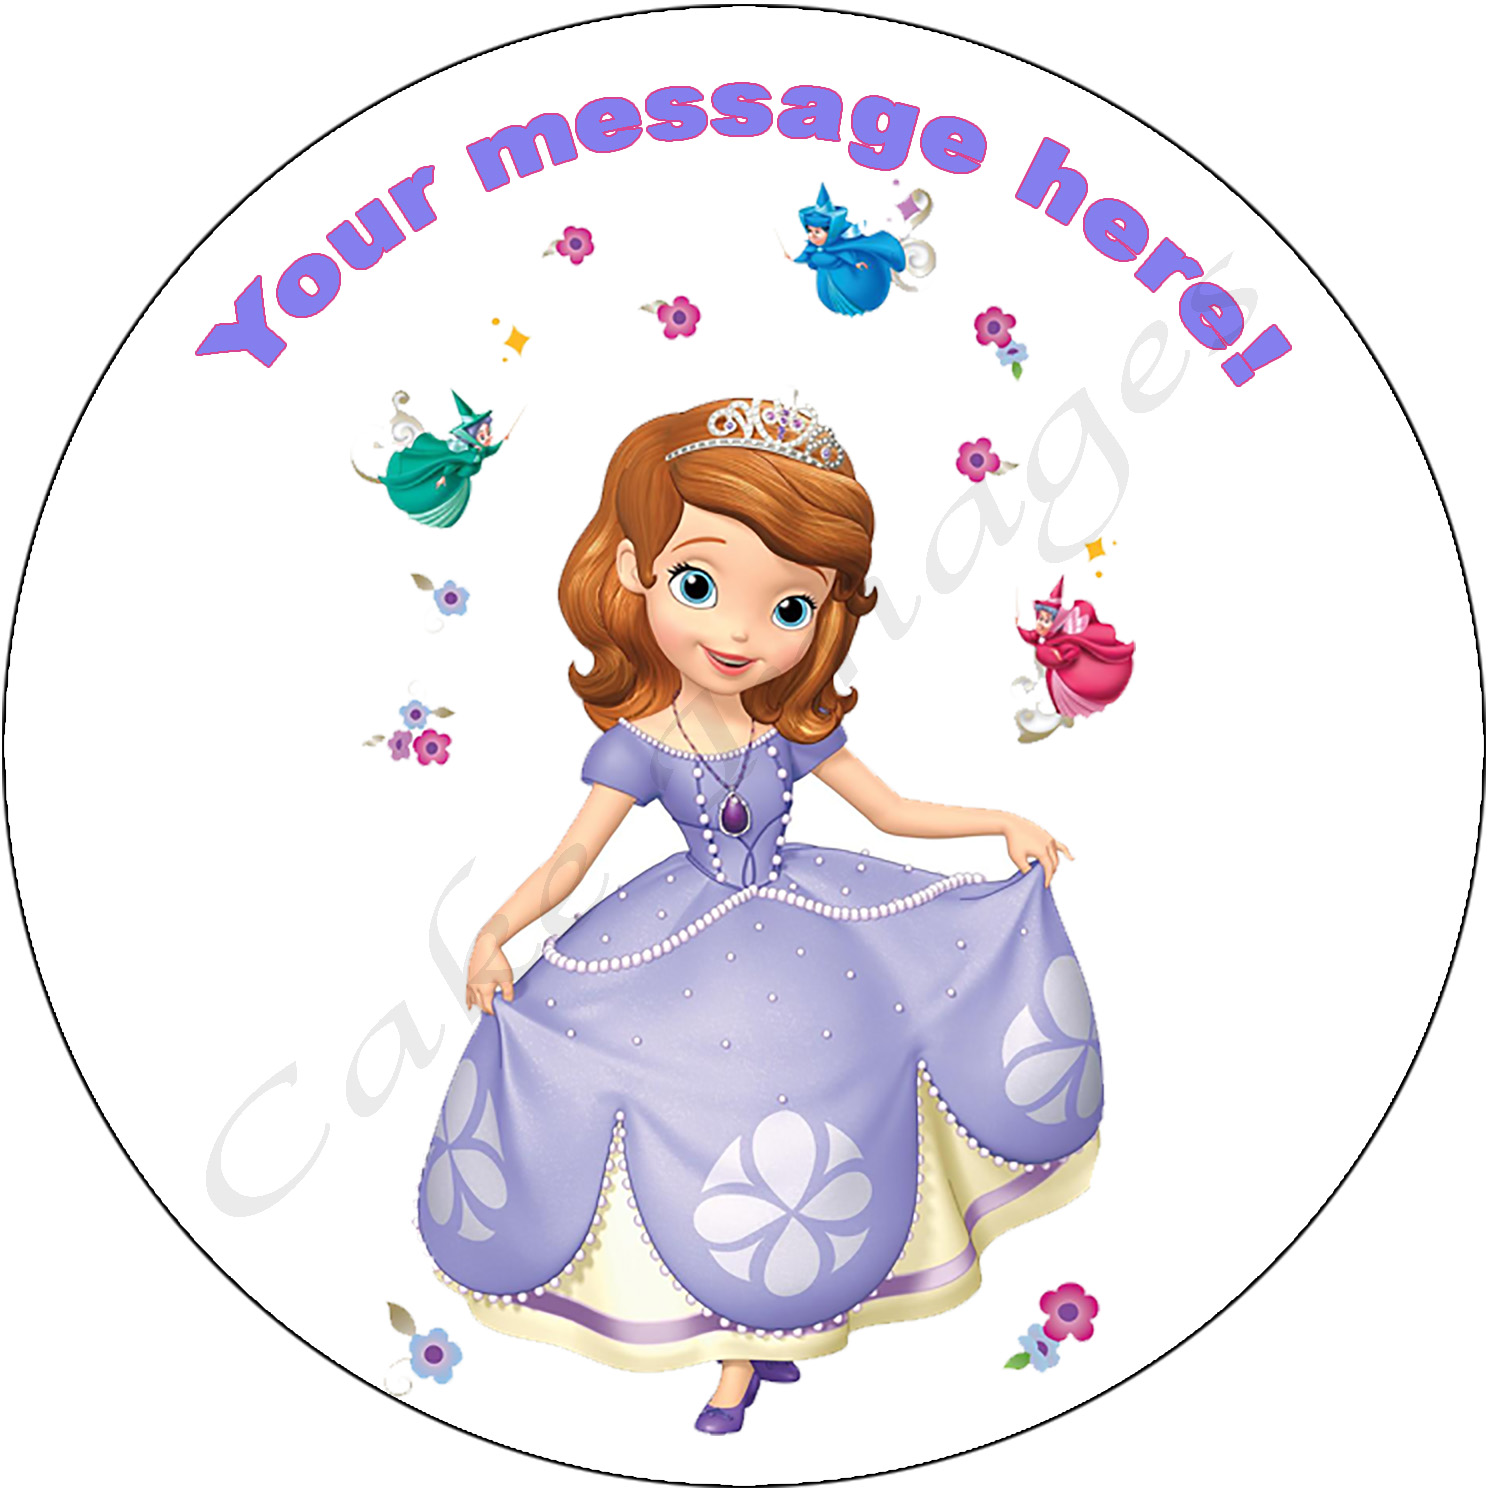 Sofia the First Edible Cake Topper on Frosting Paper